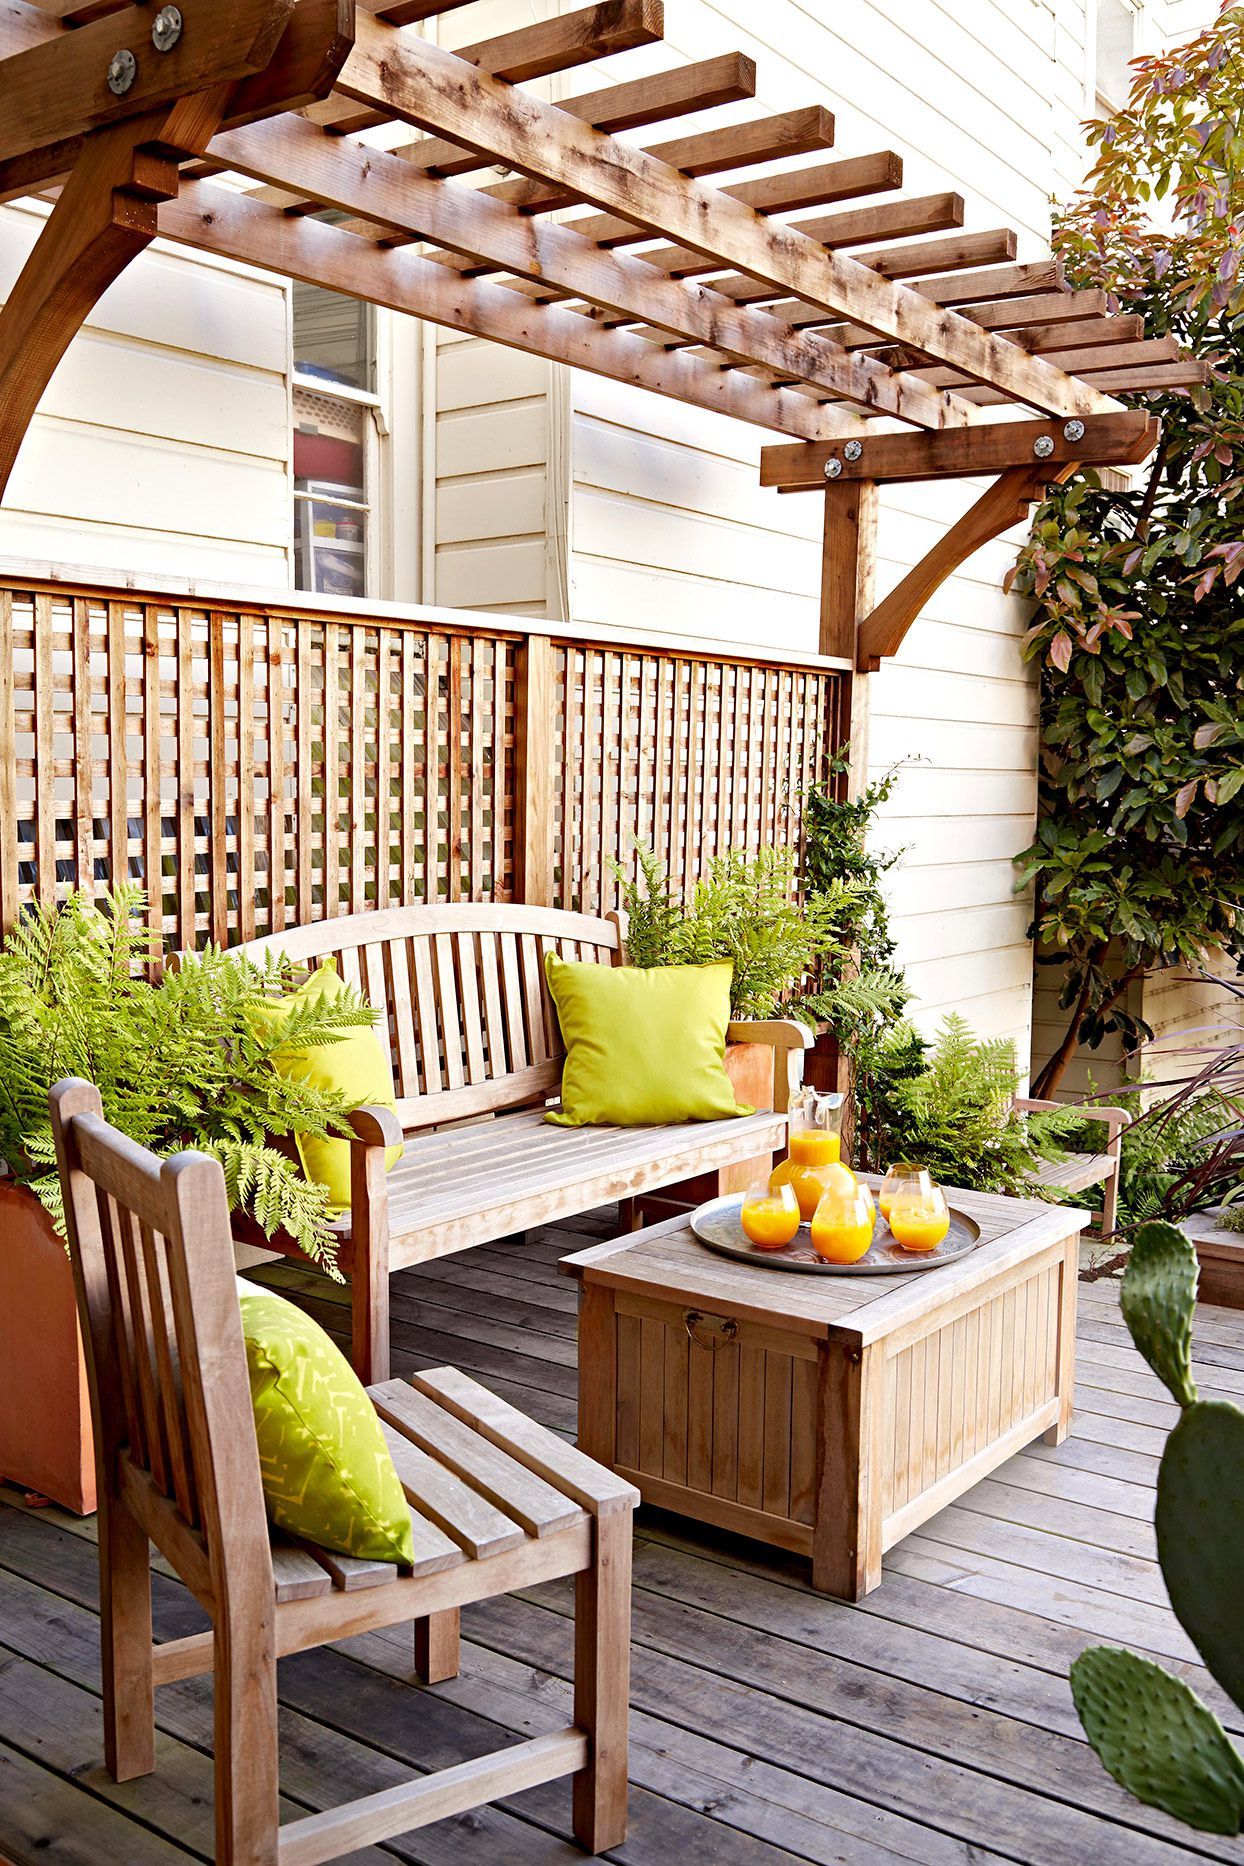 20 Small Deck Ideas To Maximize Your Outdoor Living Space Pertaining To Balcony And Deck With Soft Cushions (View 11 of 15)